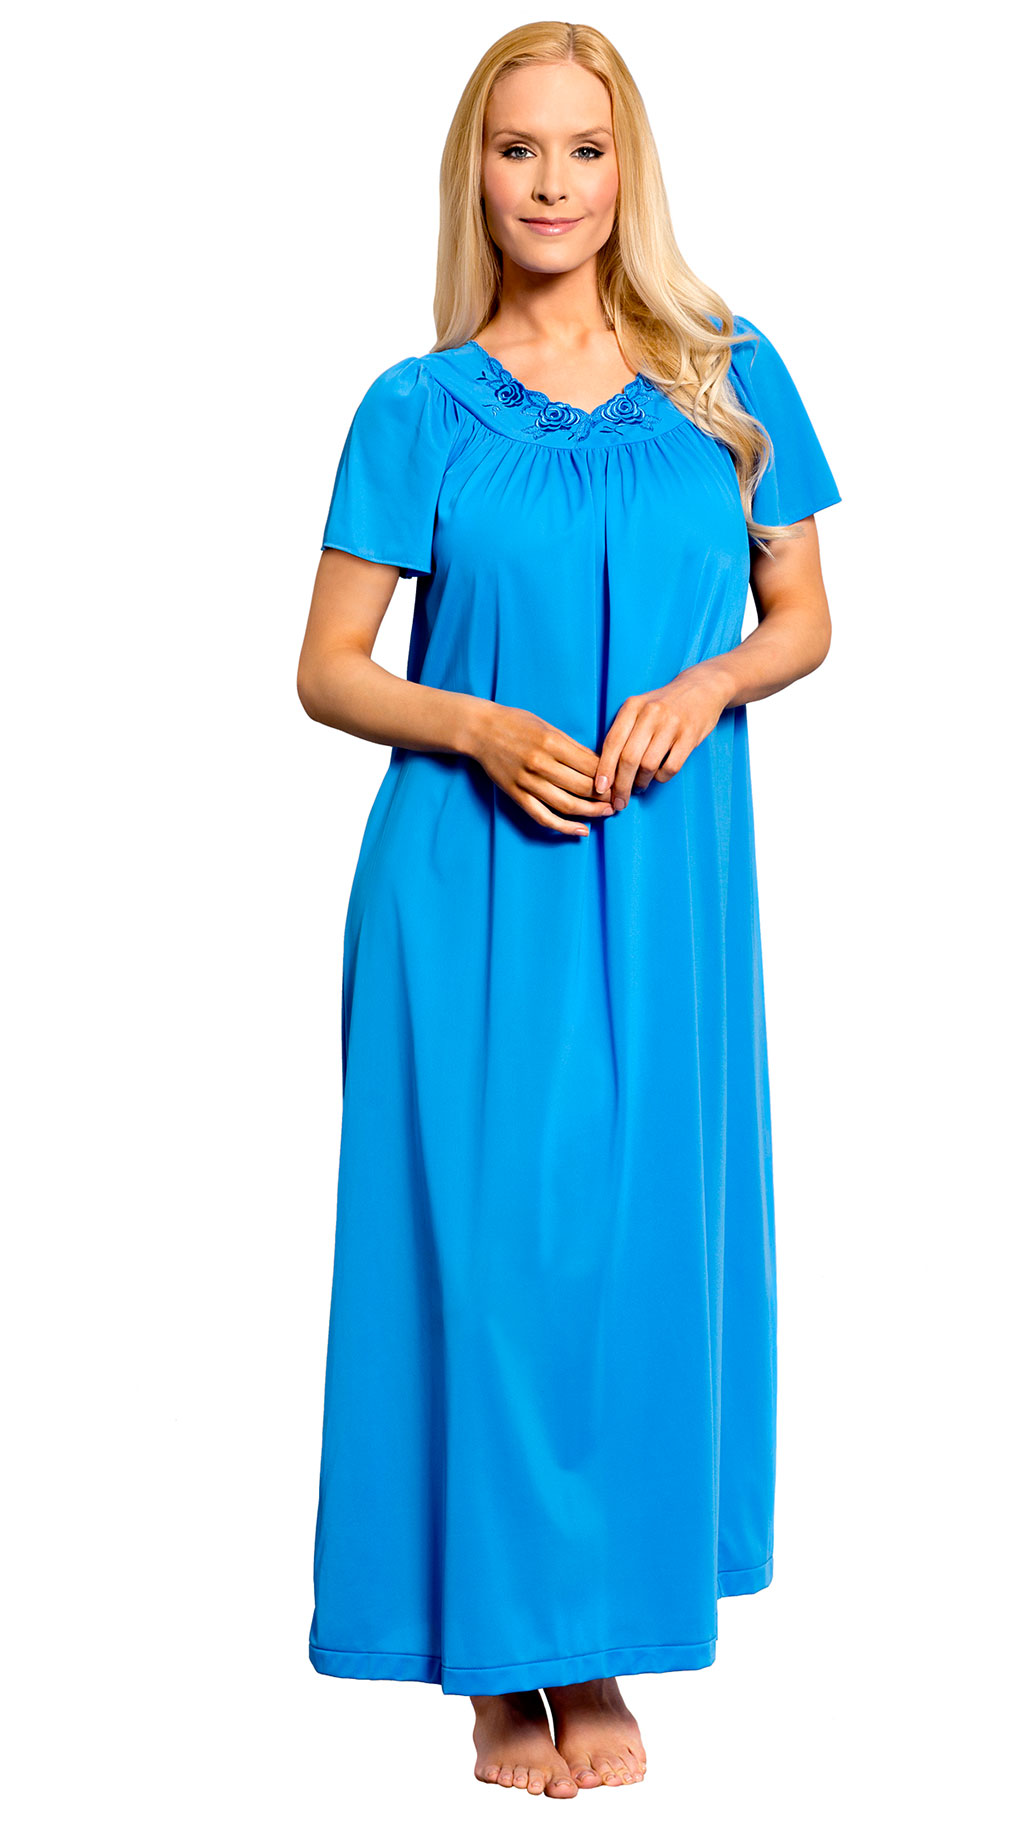 Shadowline Nightgowns For Women | vlr.eng.br